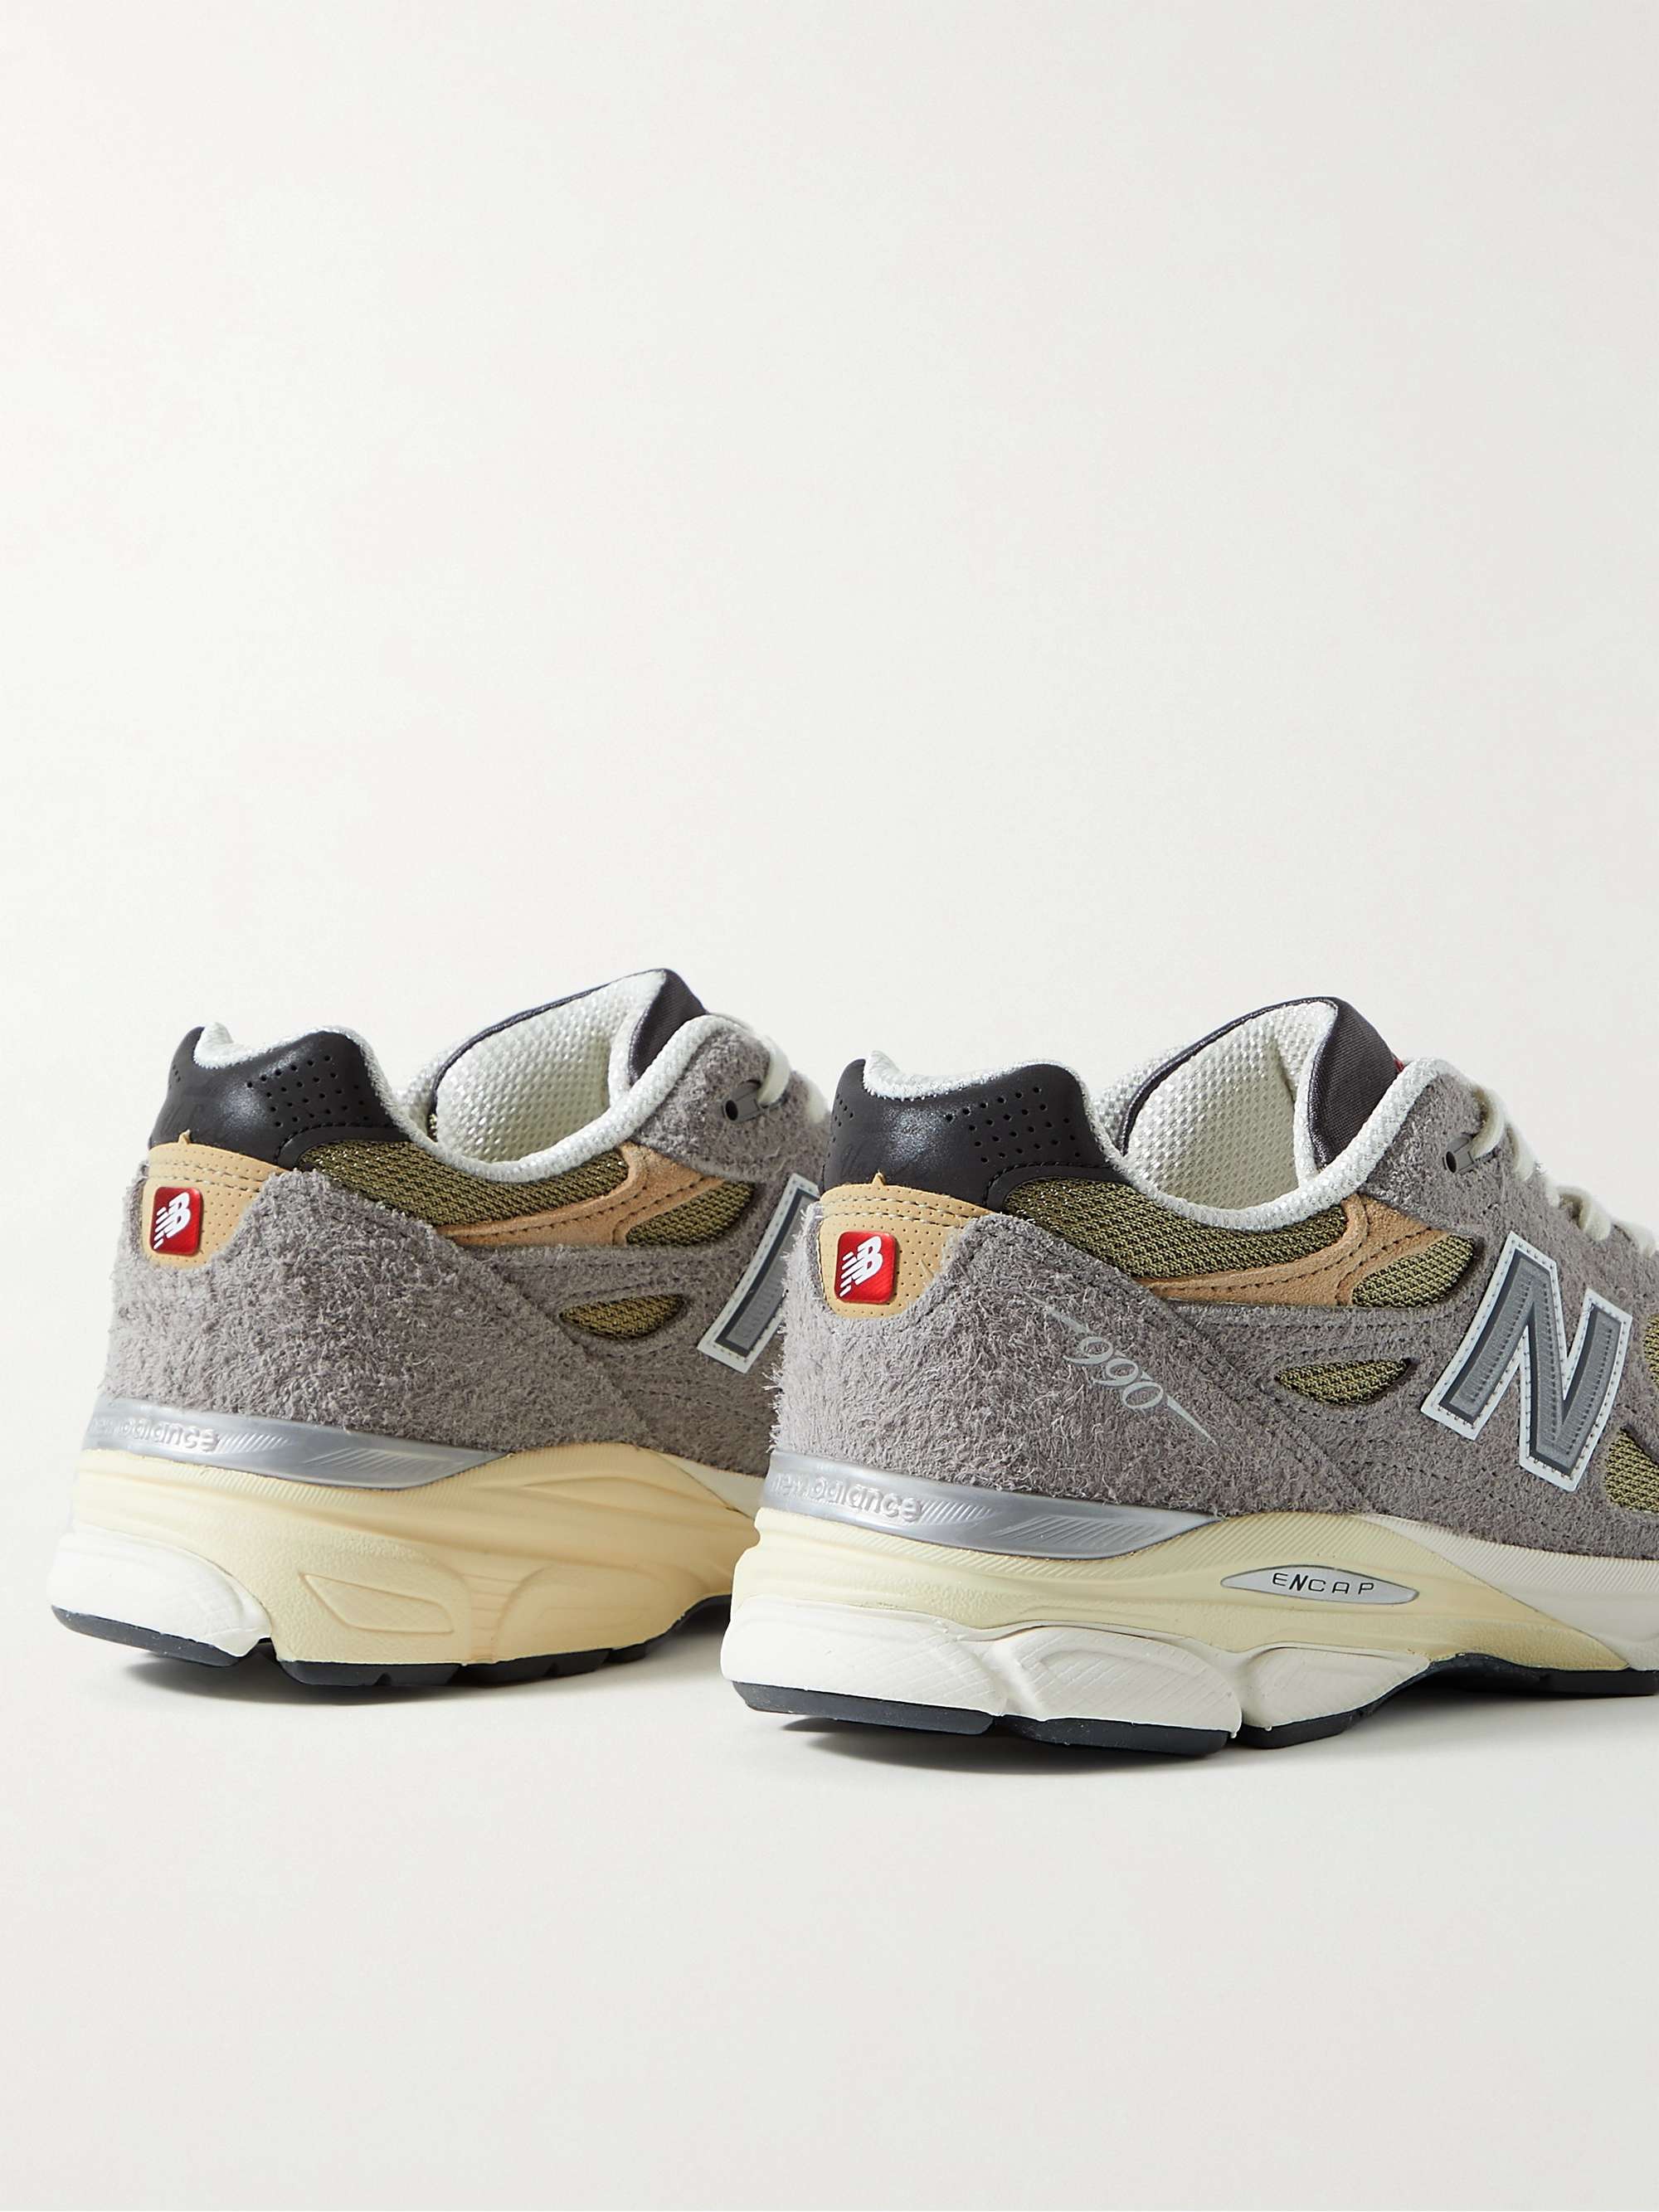 NEW BALANCE M990v3 Suede, Mesh and Leather Sneakers